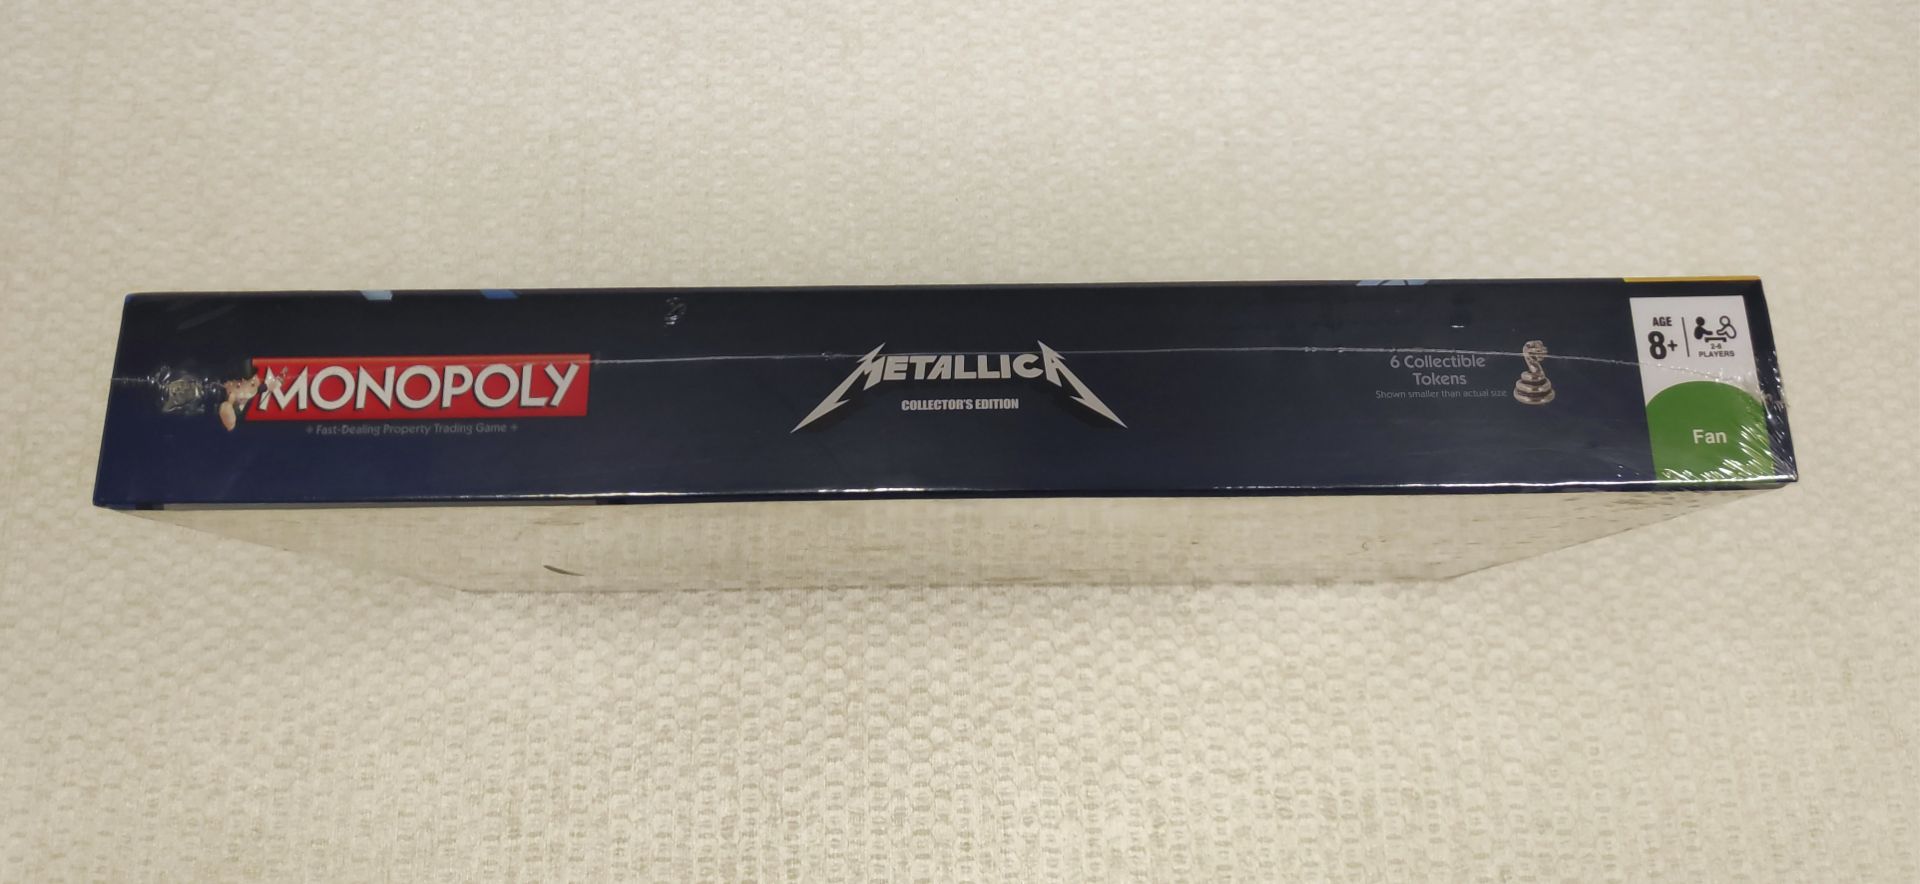 1 x Metallica Collector's Edition Monopoly - New/Sealed - Image 2 of 8